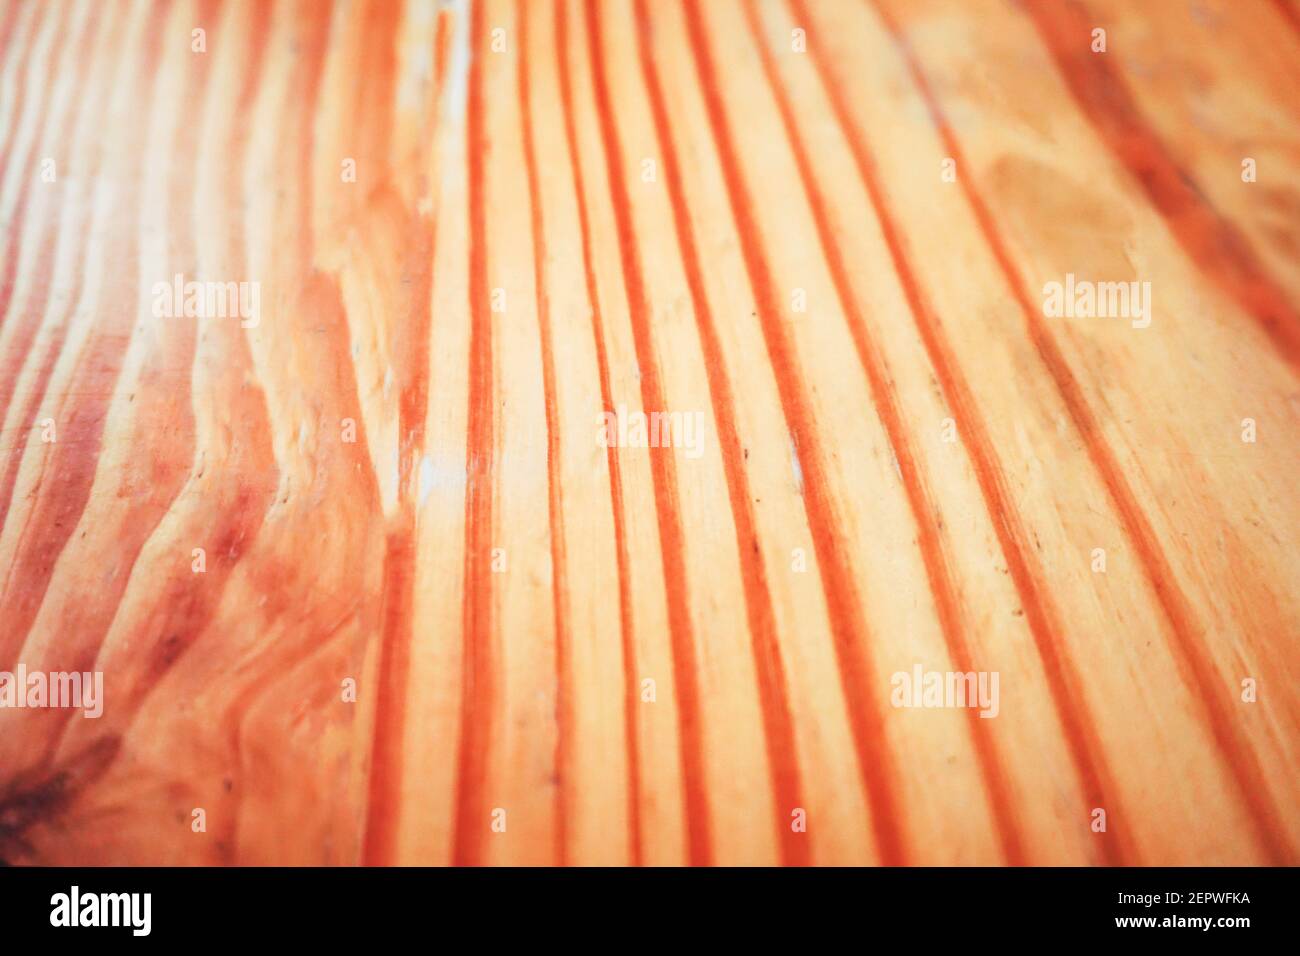 abstract orange wooden texure background Stock Photo